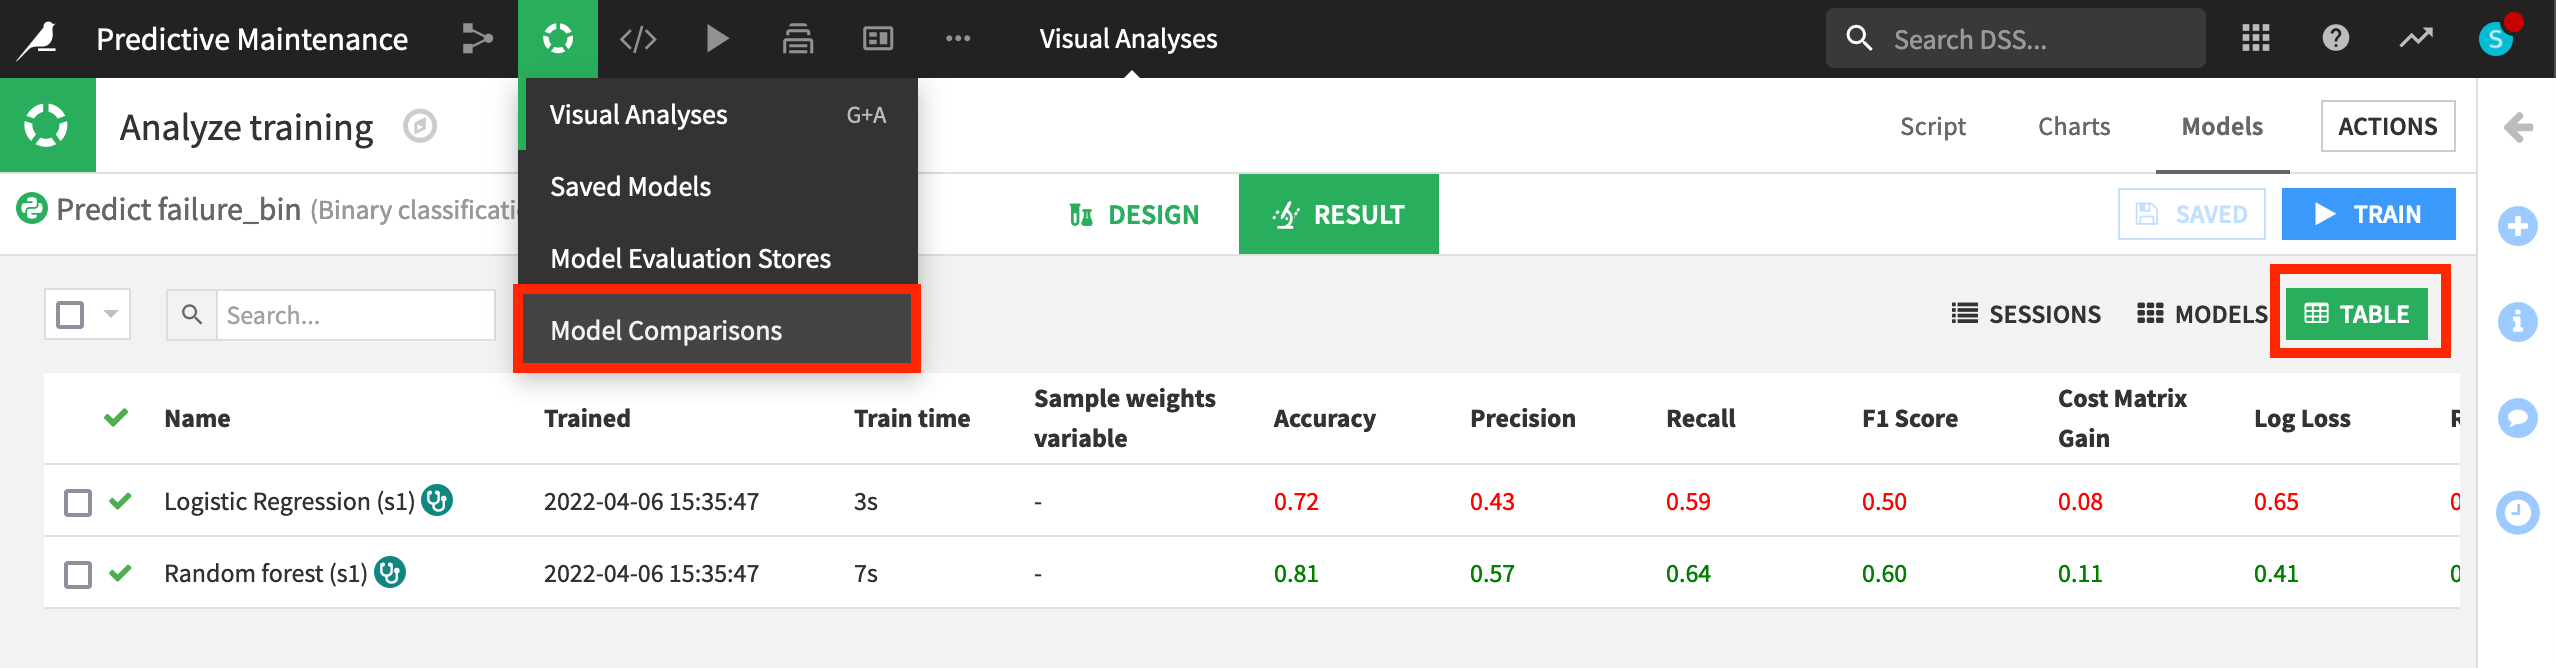 Dataiku screenshot of the table view of model results.